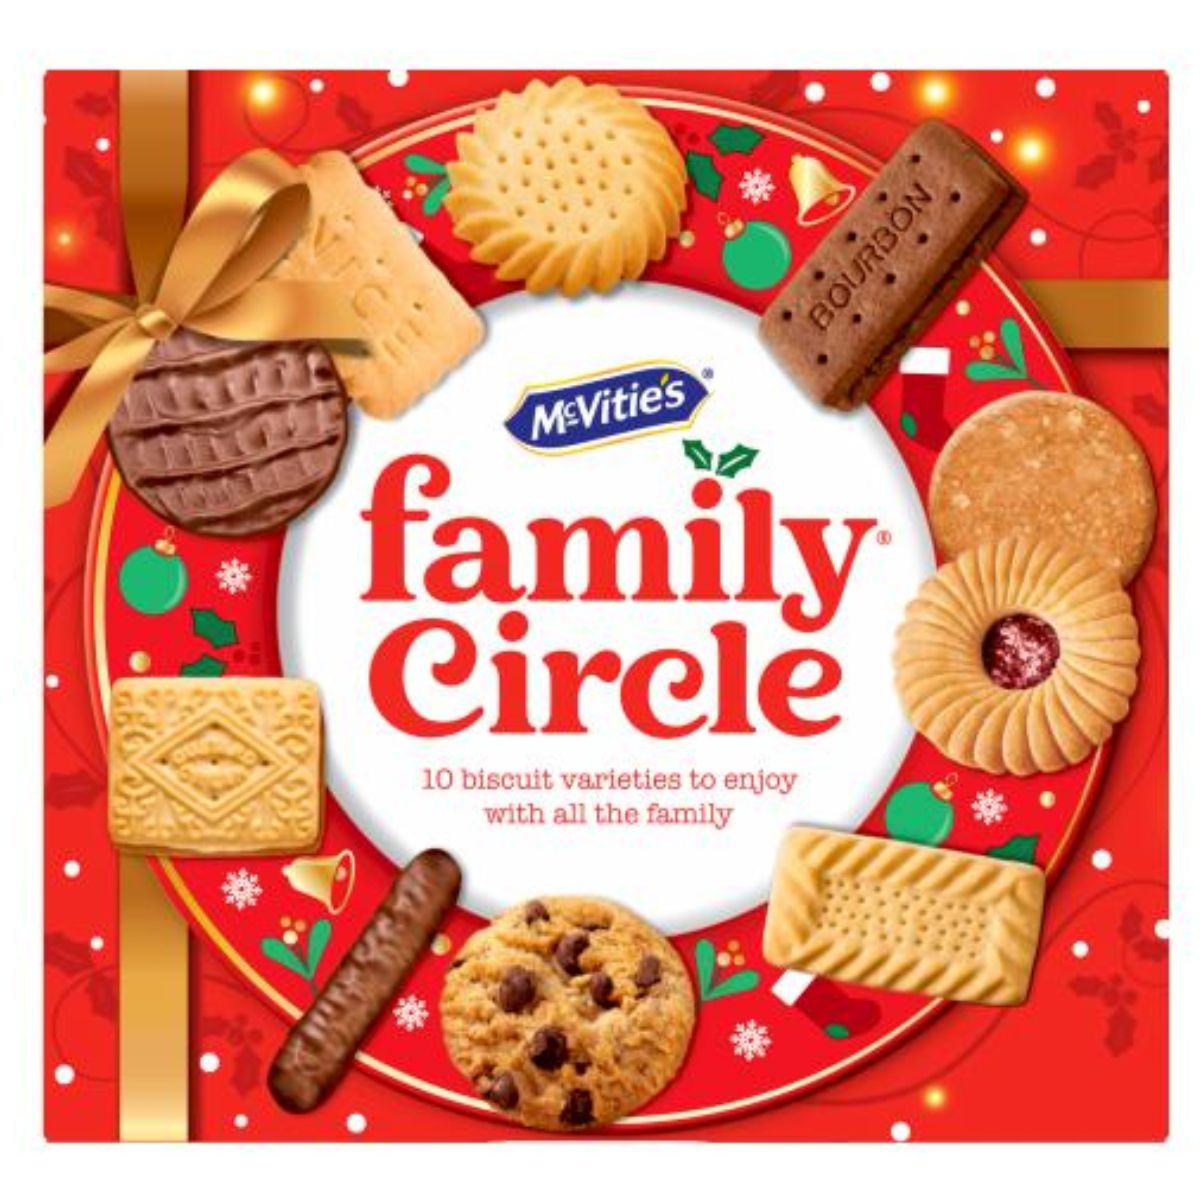 McVities - Family Circle - 400g biscuits.